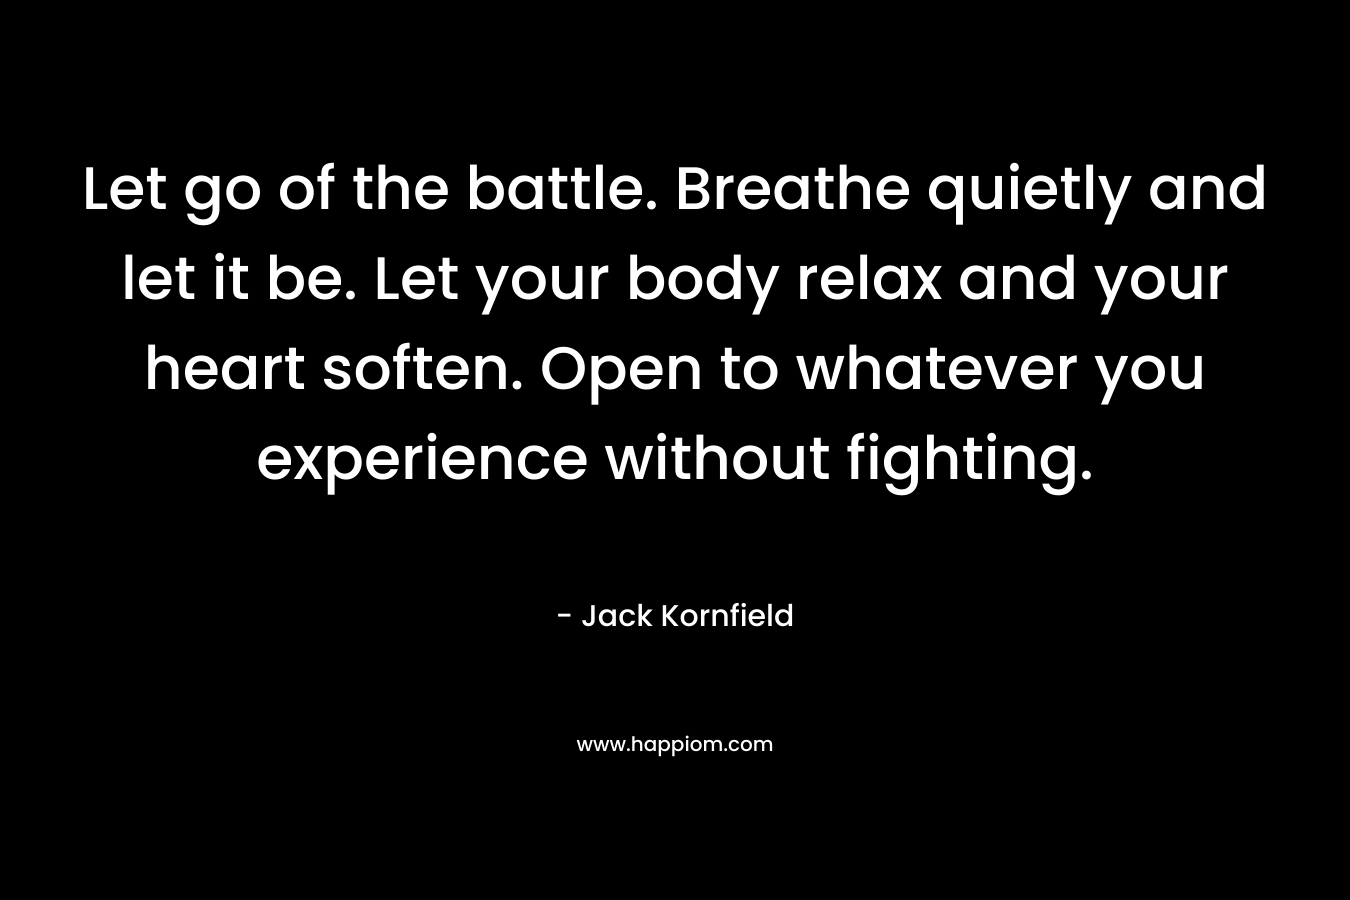 Let go of the battle. Breathe quietly and let it be. Let your body relax and your heart soften. Open to whatever you experience without fighting.